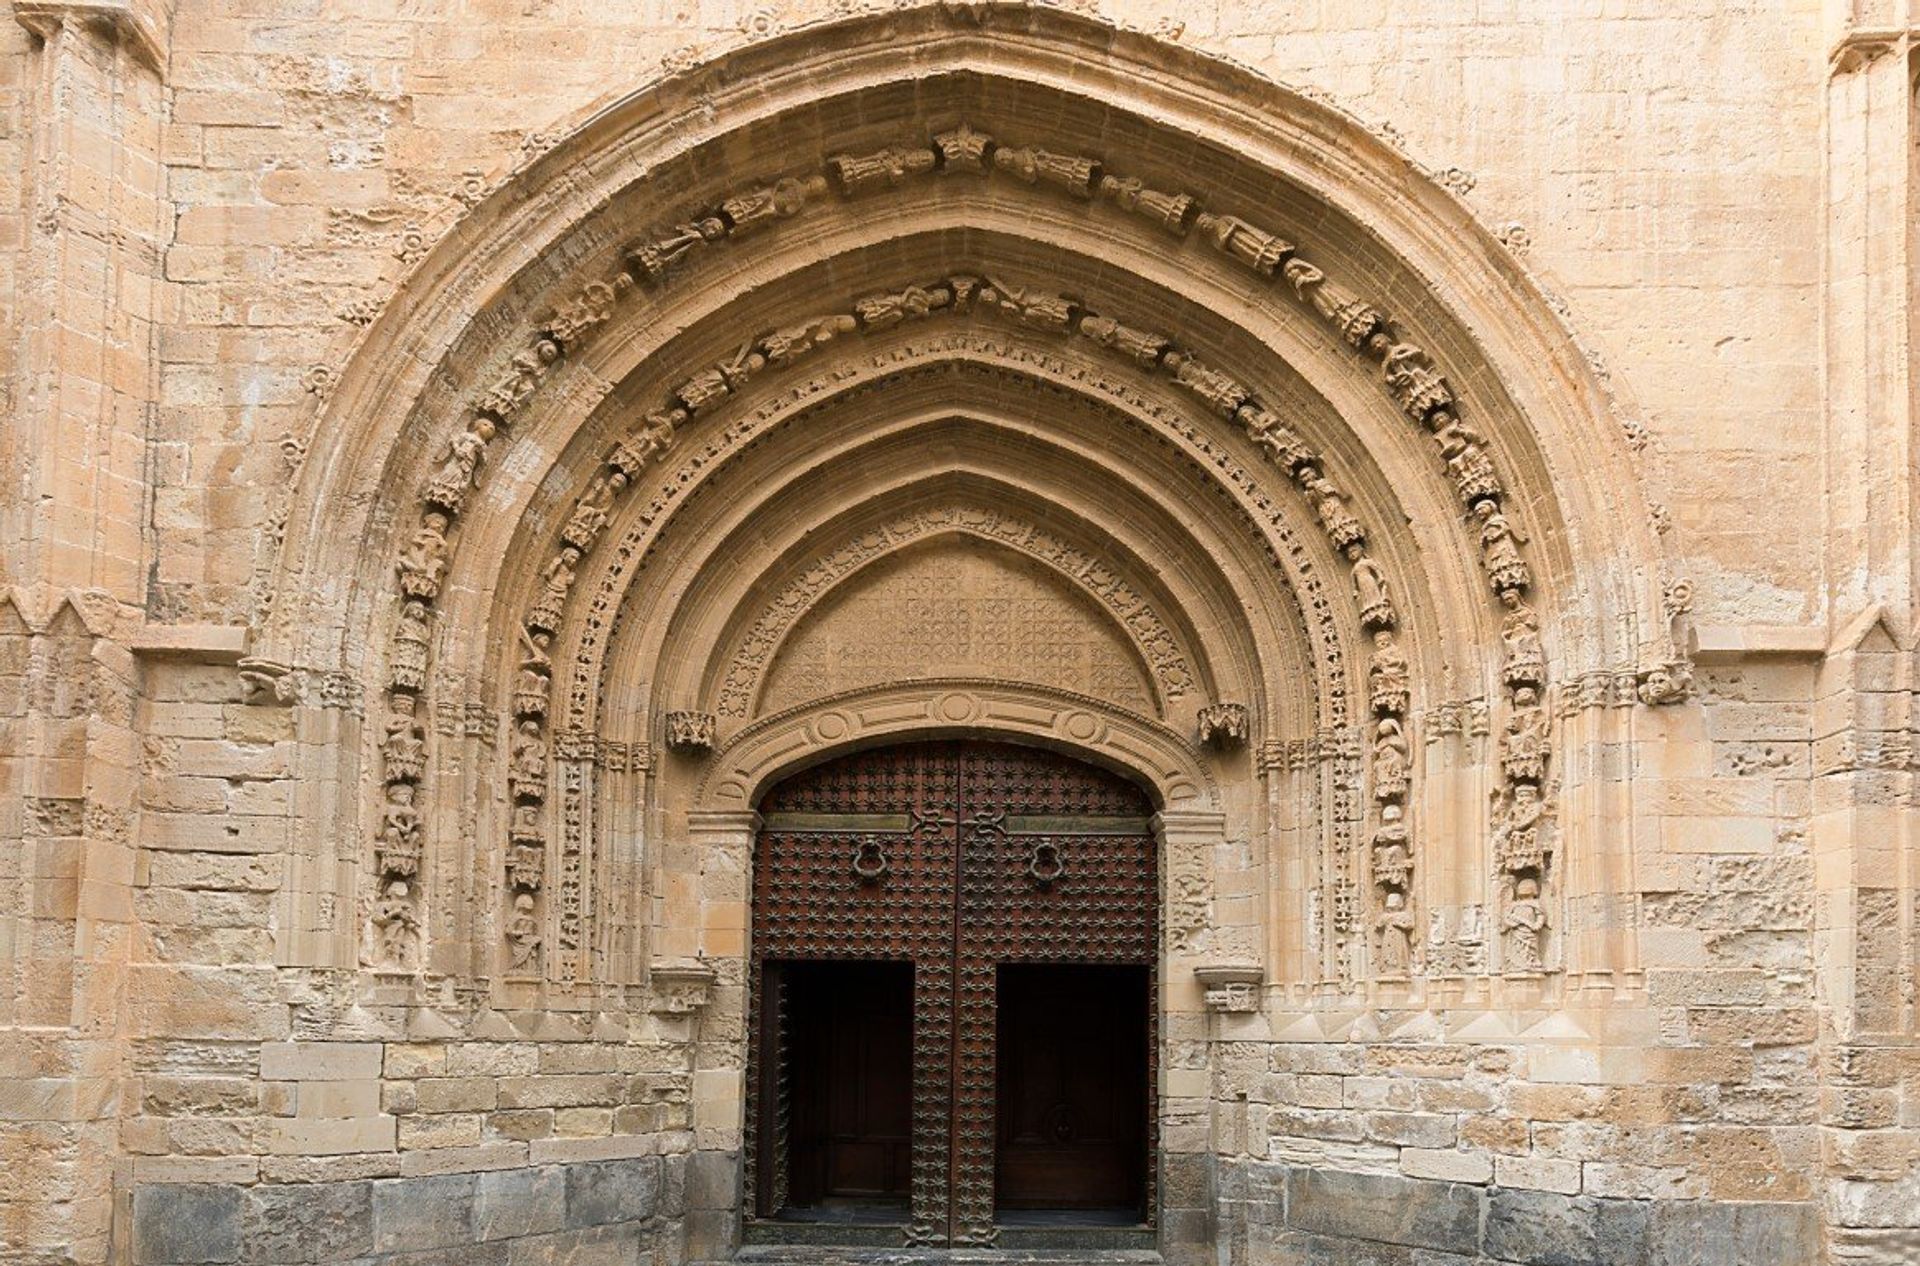 The Cathedral of Orihuela is a beautiful example of 14th century Gothic architecture